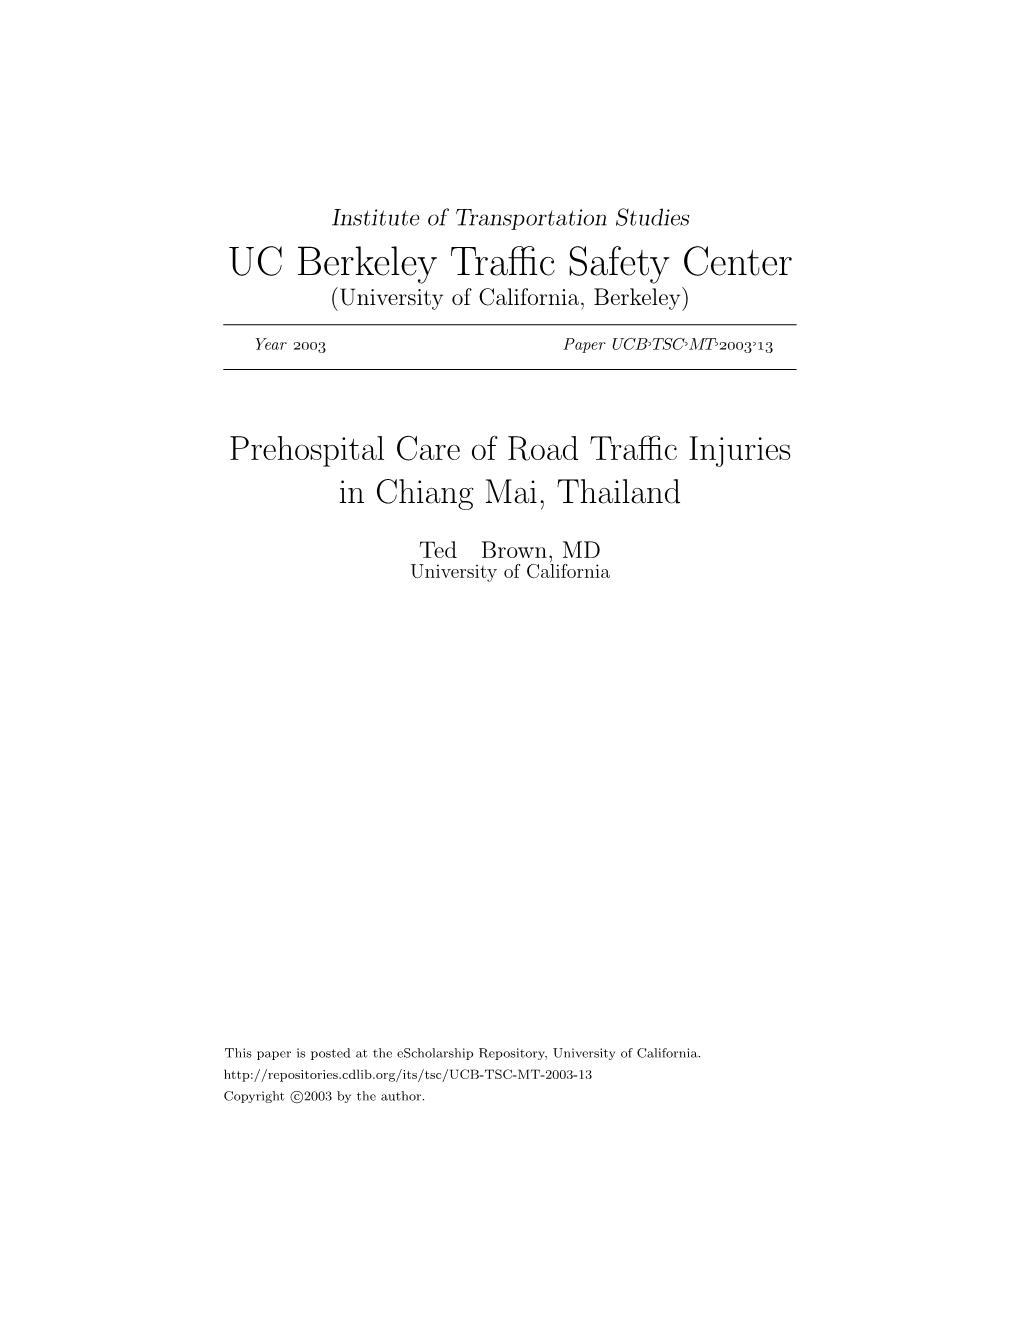 Prehospital Care of Road Traffic Injuries in Chiang Mai, Thailand